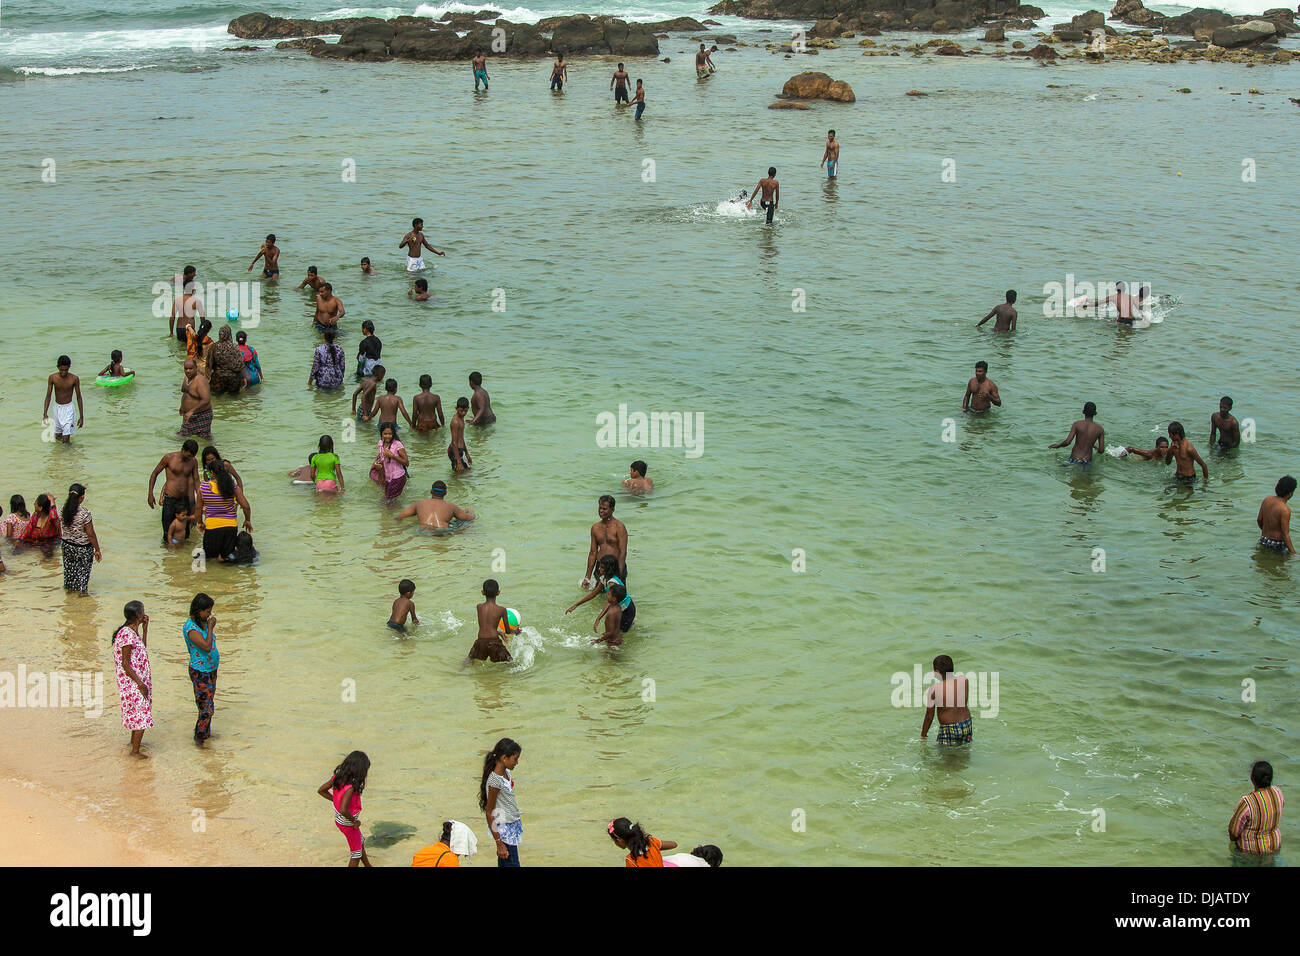 Sri Lankan people relaxing and swimming in the ocean Stock Photo